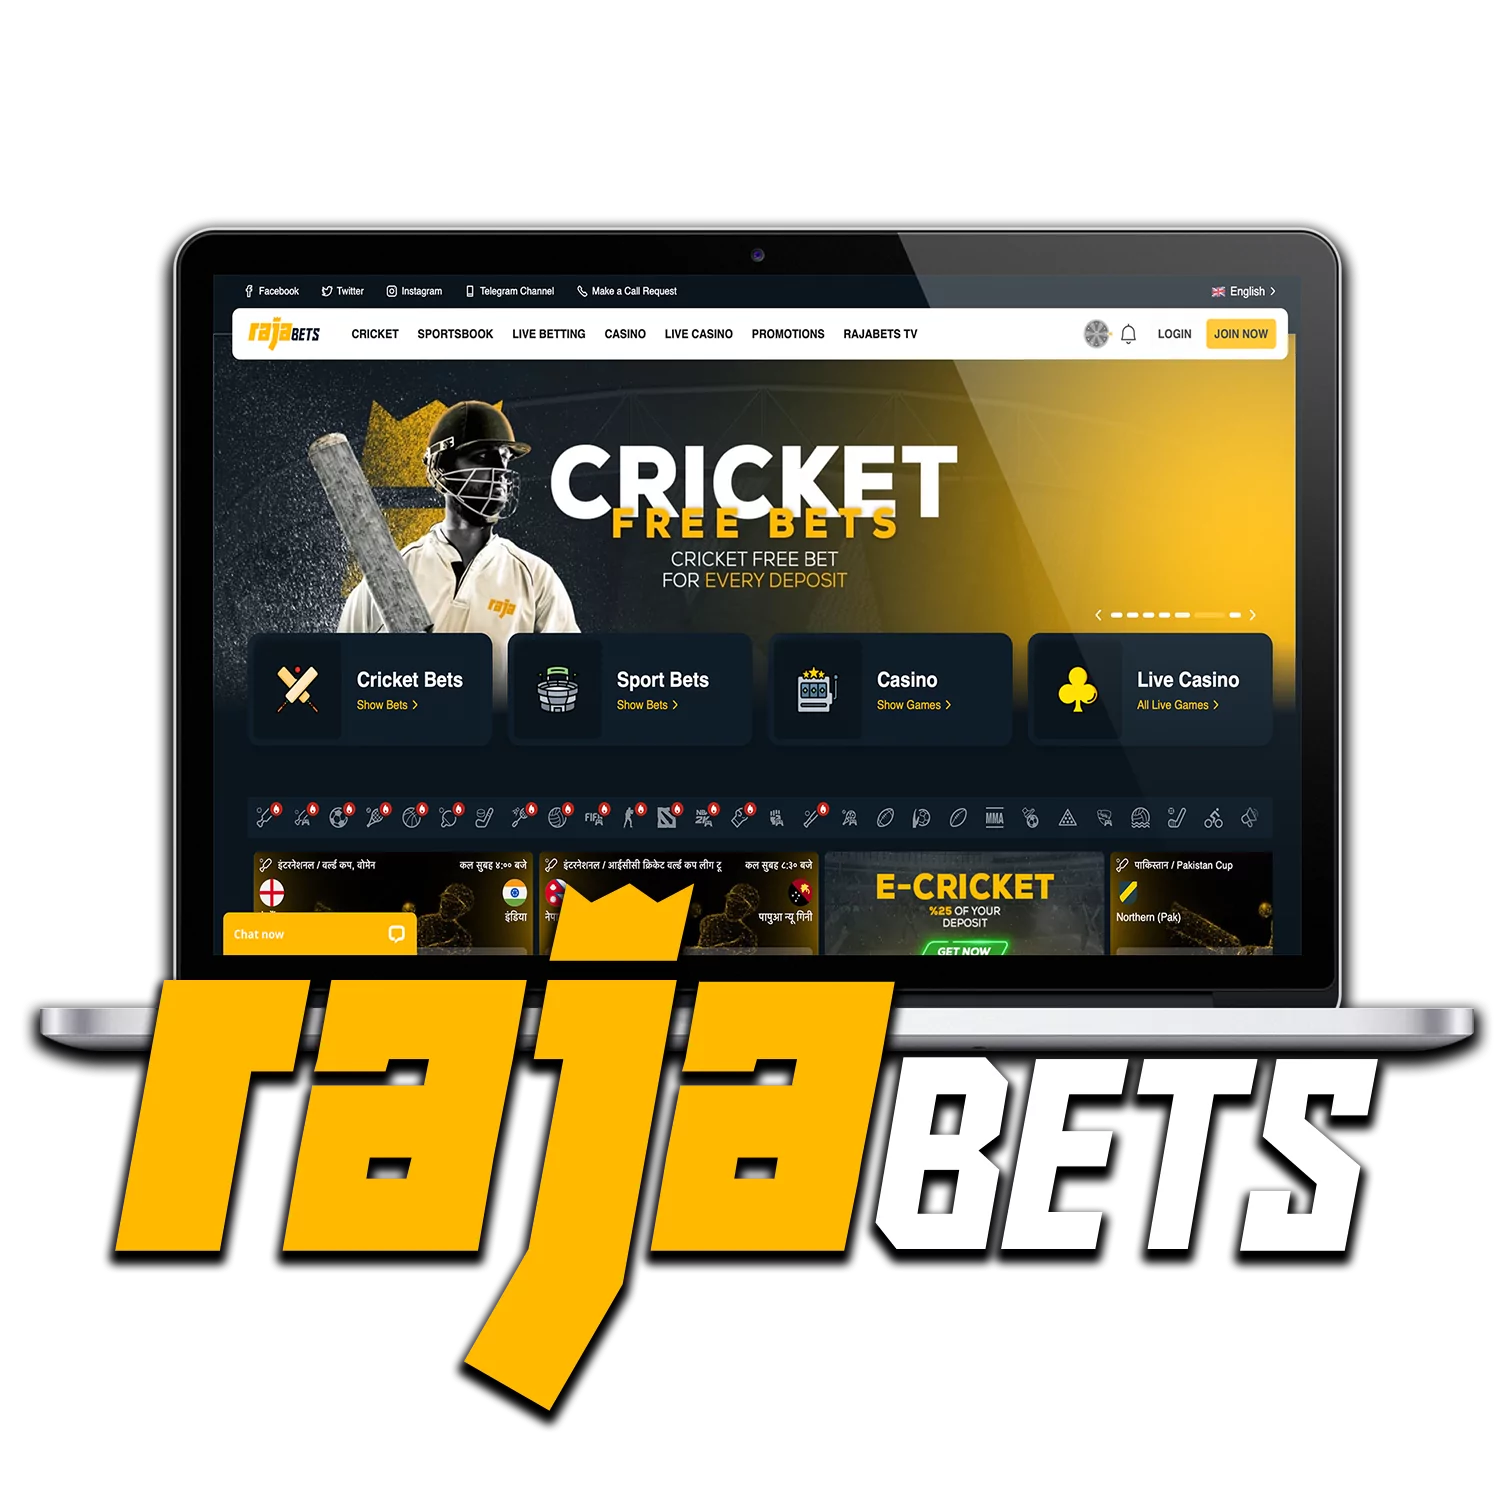 Learn how to place bets at Rajabets and win.